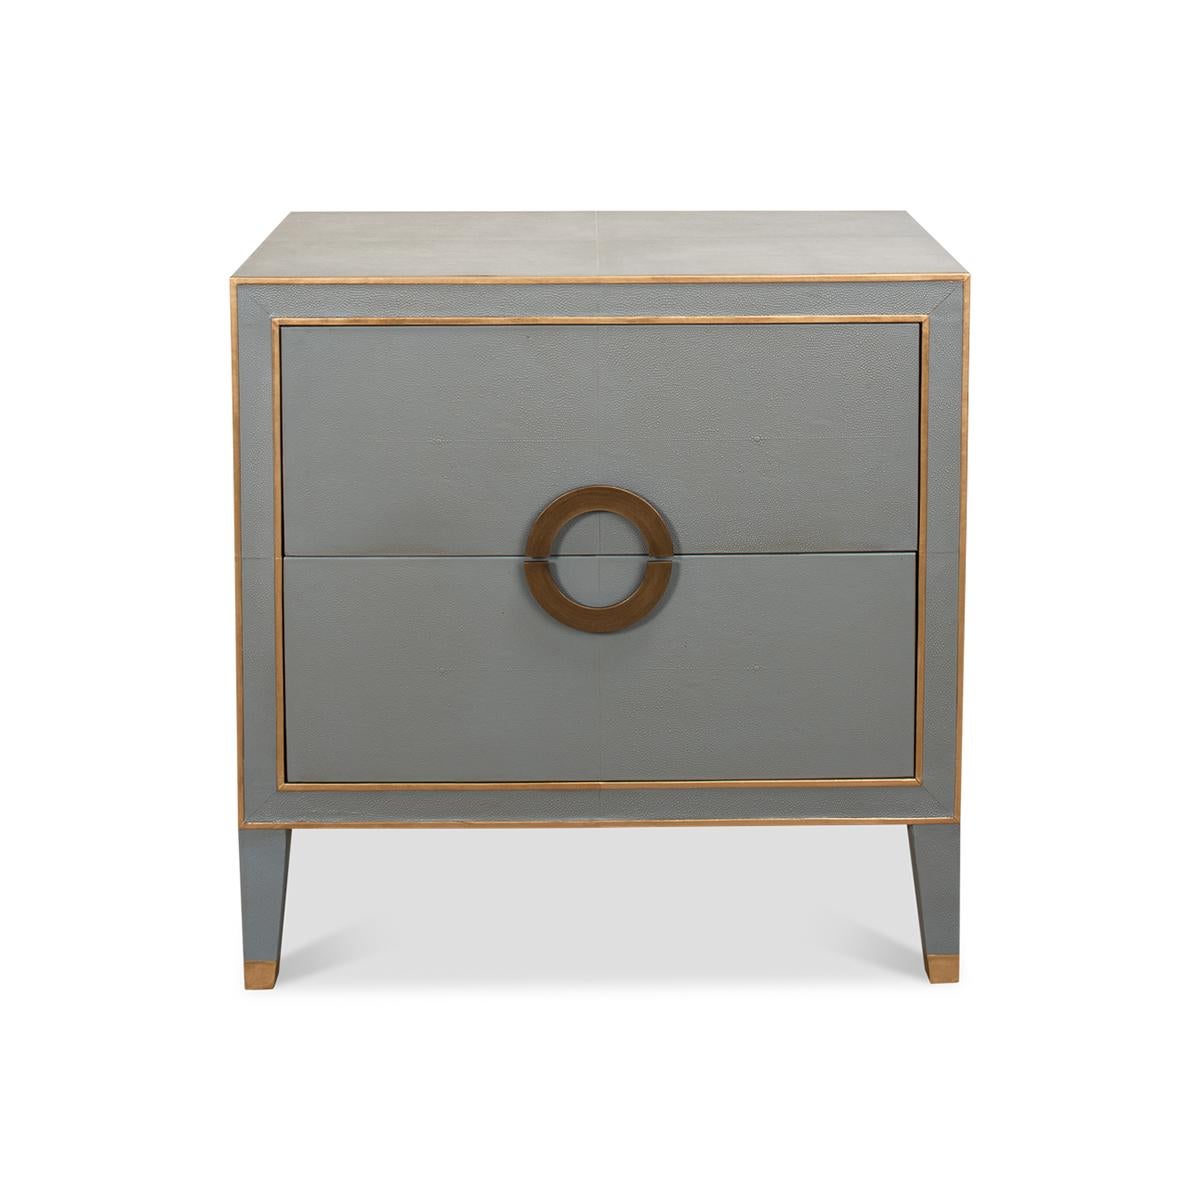 This piece combines functionality with unparalleled style, creating a statement of transitional elegance.

The standout feature of this nightstand is the soft, grey hue that perfectly contrasts with the elegant golden accents, bringing a touch of